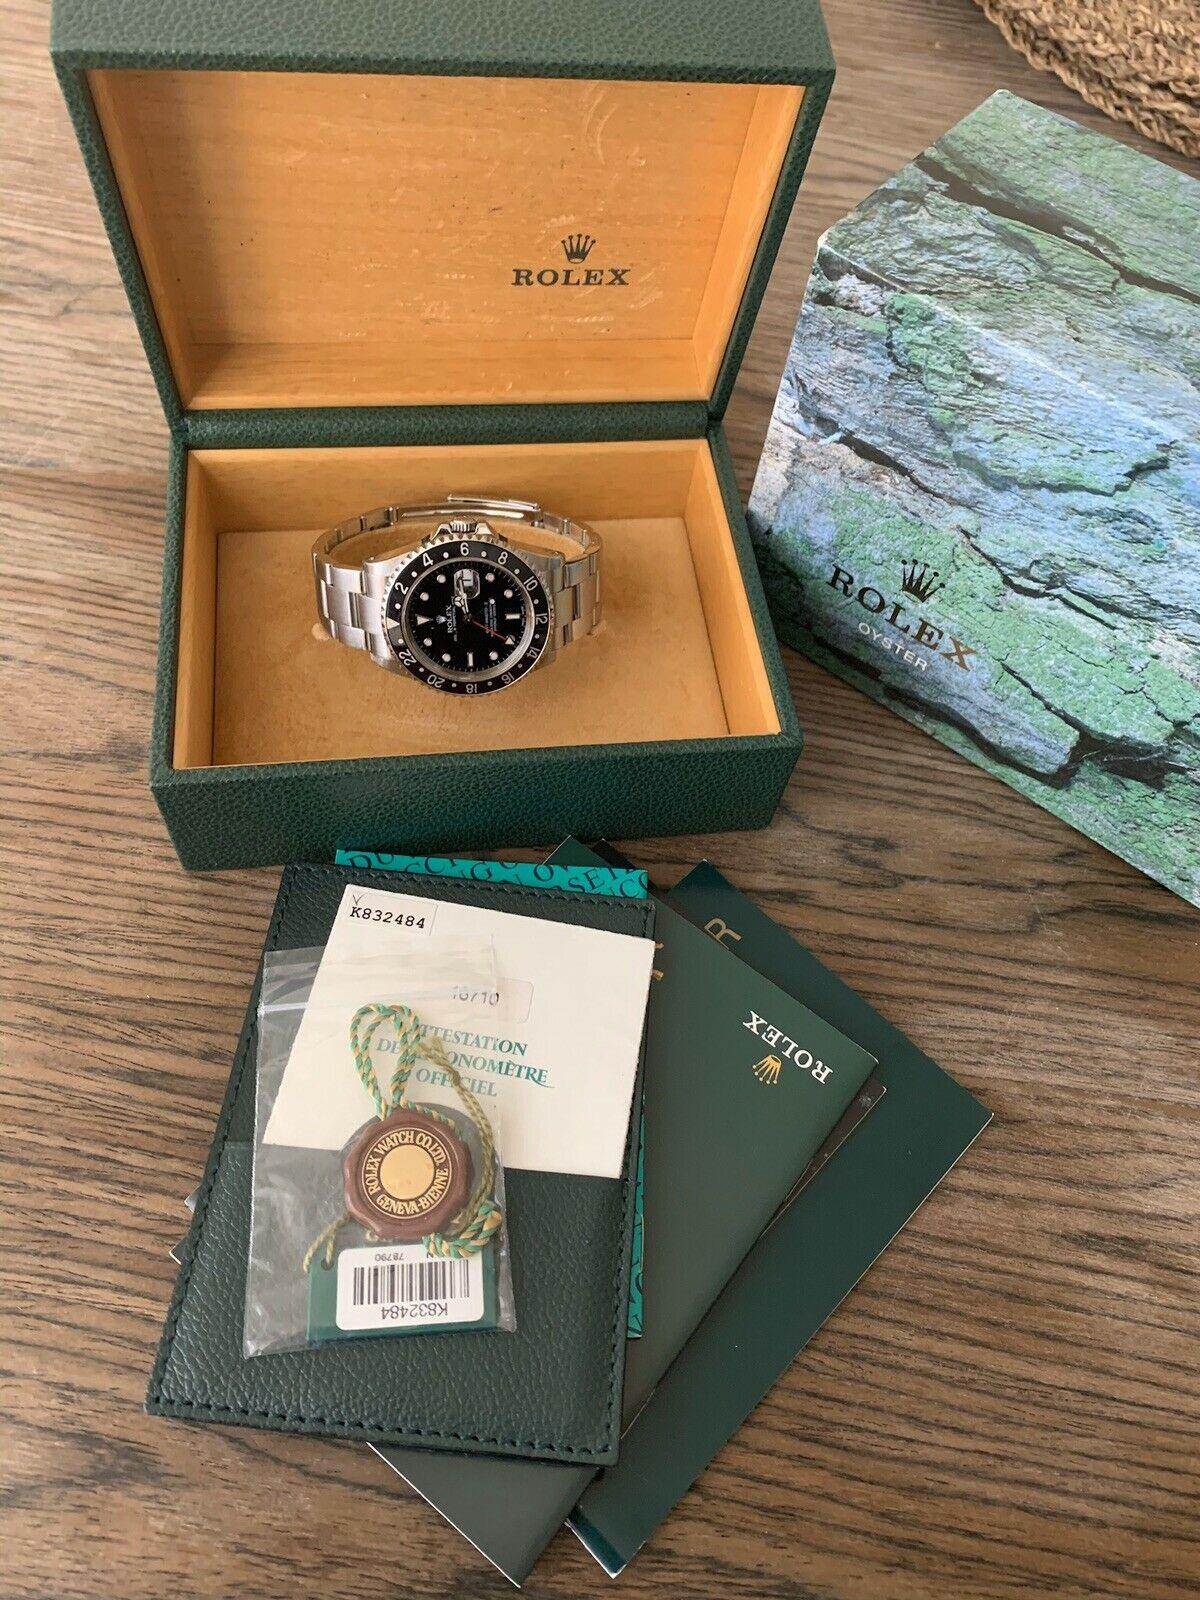 Rolex GMT Master II 16710 Watch Stainless Steel Box & Papers



Brand	Rolex
Model	GMT Master II
Dial Black 
Case Material/Size	Stainless Steel/40mm
Bezel	Black
Bracelet	Oyster Bracelet Stainless Steel 
Movement	Automatic
Ref #	16710
Box &